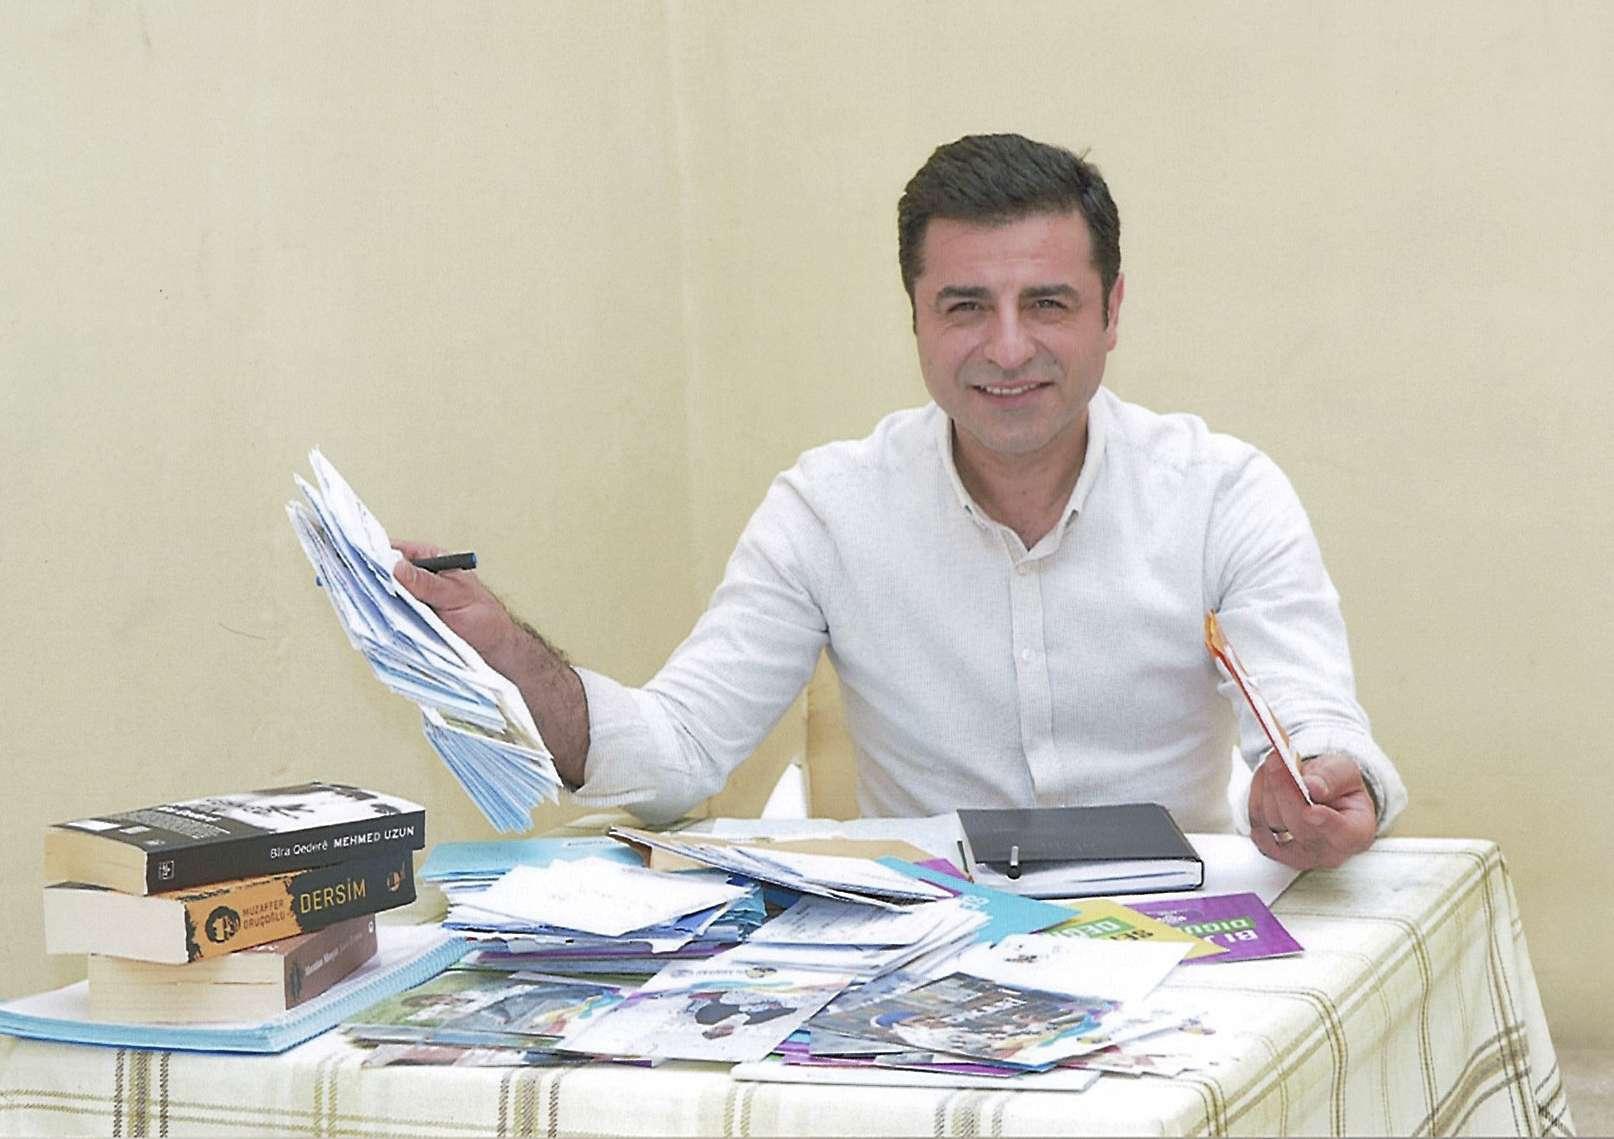 Human Rights Watch calls for immediate release of Demirtas